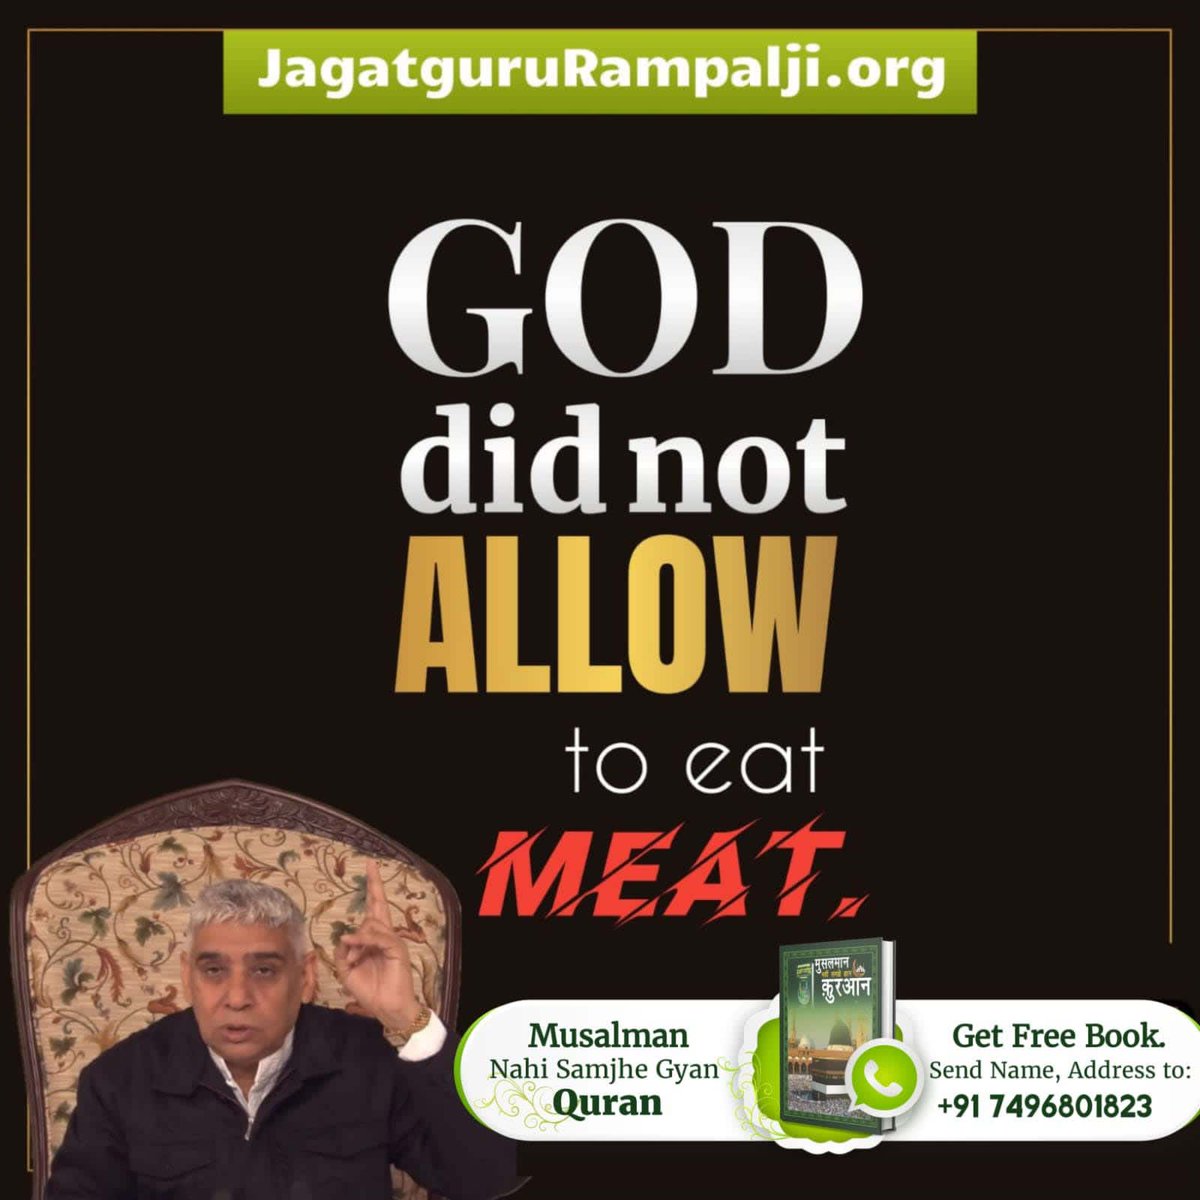 #रहम_करो_मूक_जीवों_पर
'Scripture teaches kindness to all creatures. Yet, how kind is it to eat meat, knowing the pain it causes? Let's align actions with values. ✨📖 
Sant RampalJi YouTube Channel